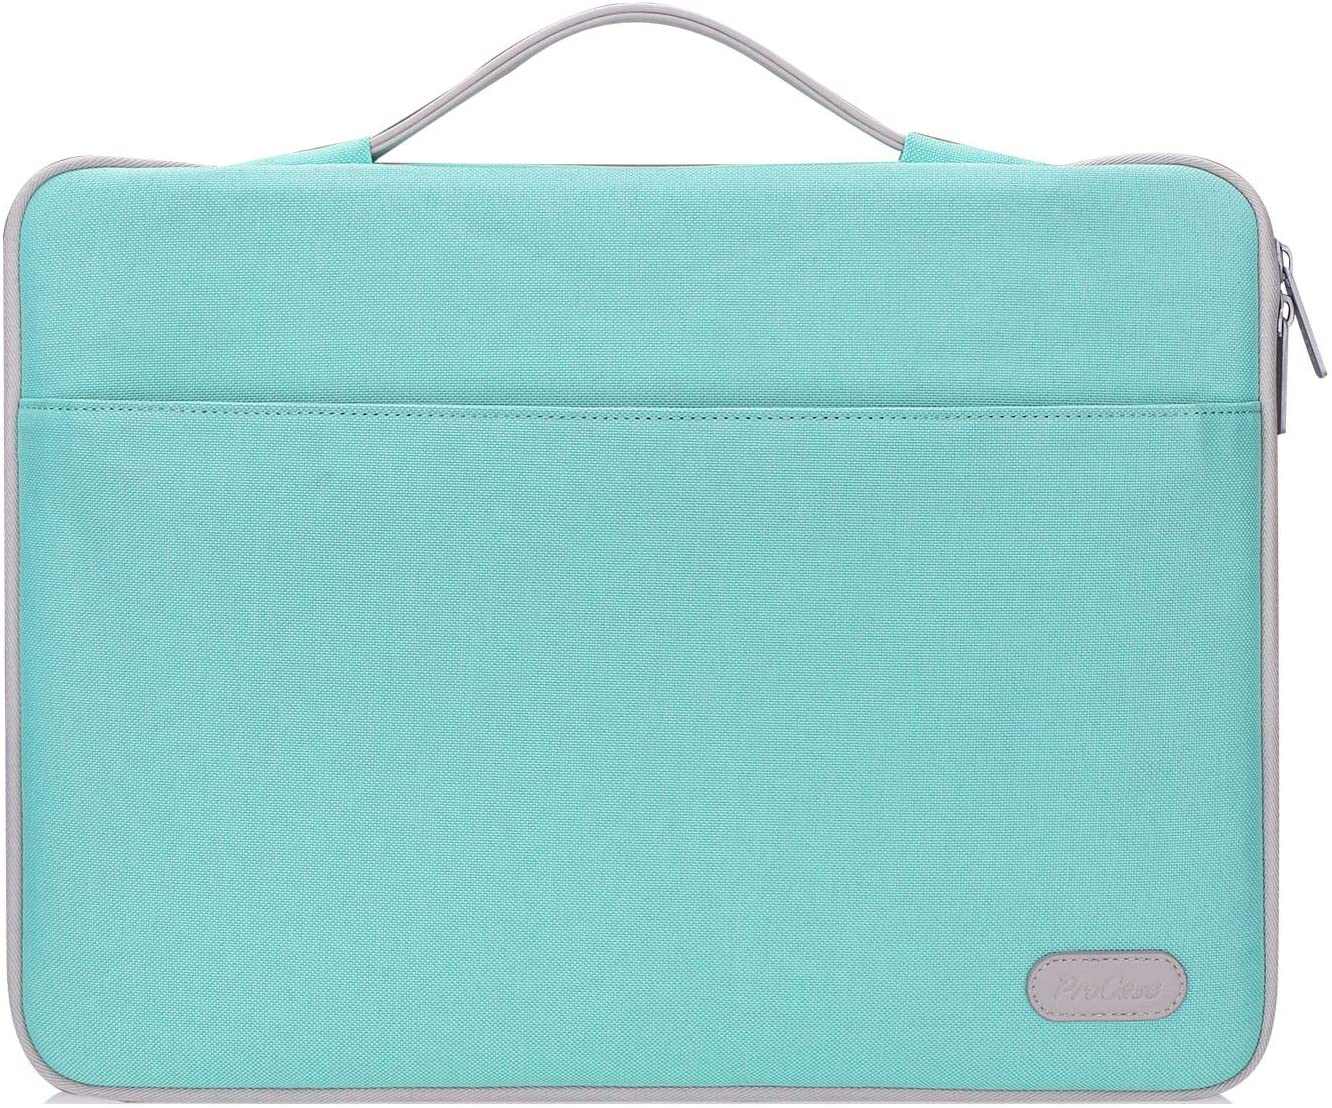 Laptop Sleeve Case Protective Carrying Bag | ProCase mint green